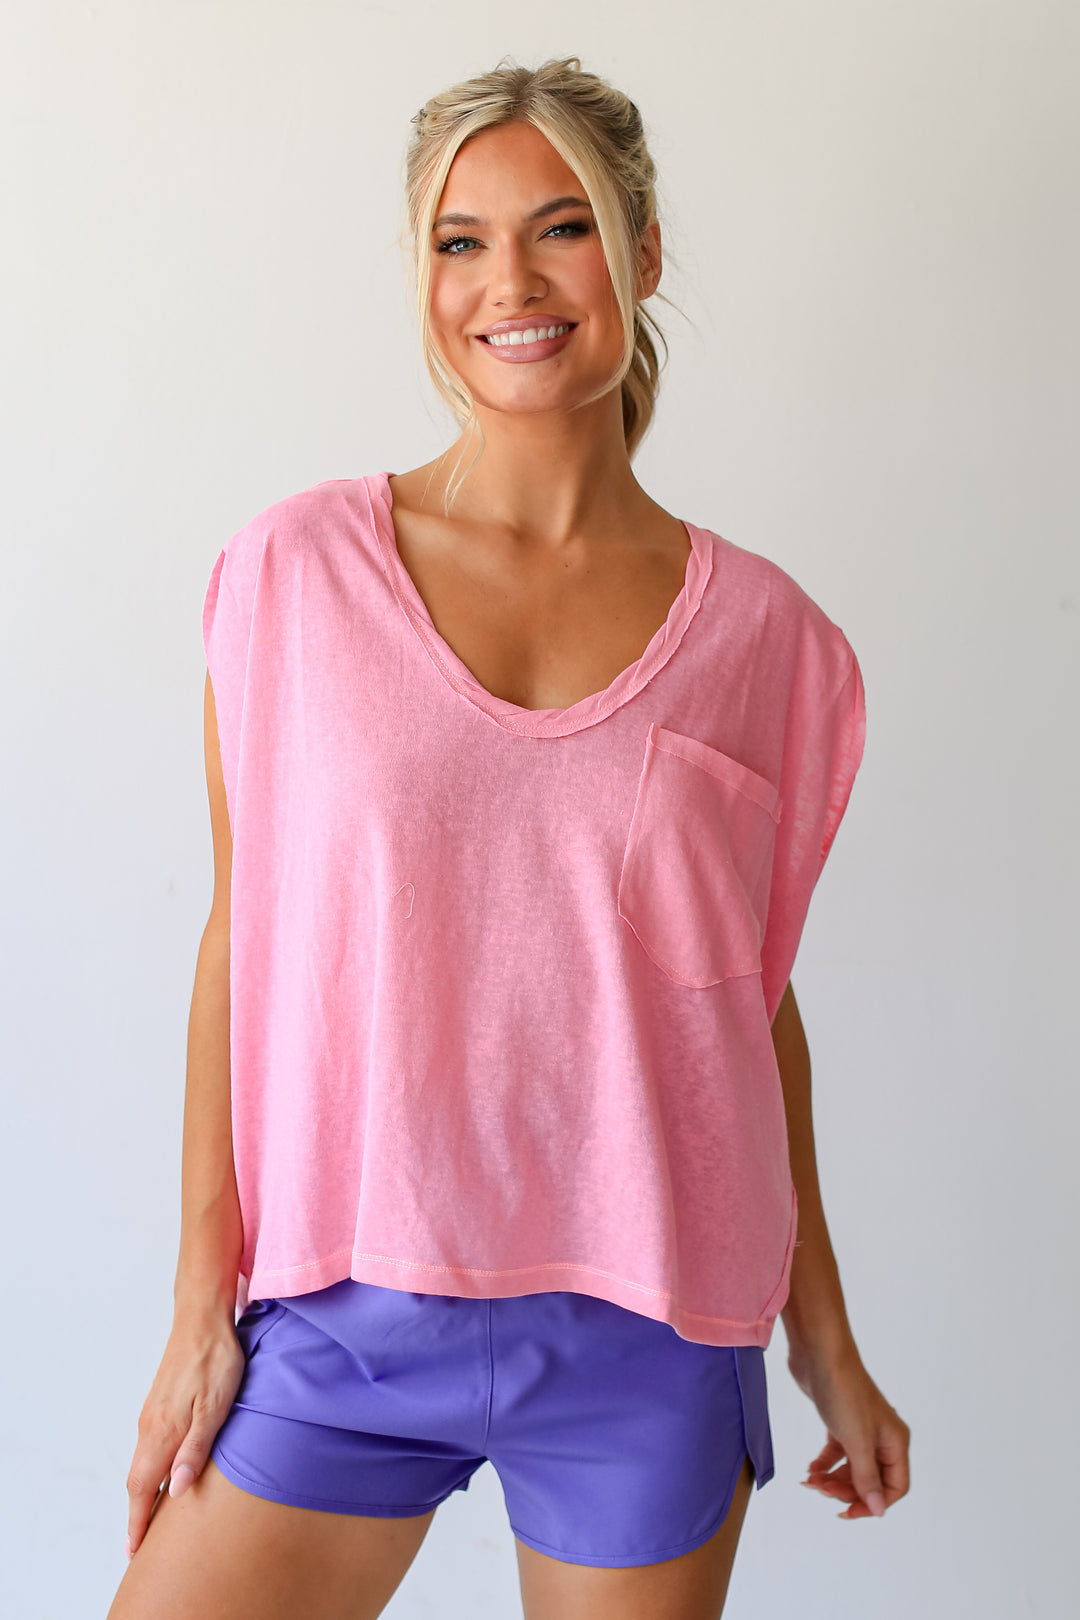 pink Tee on dress up model